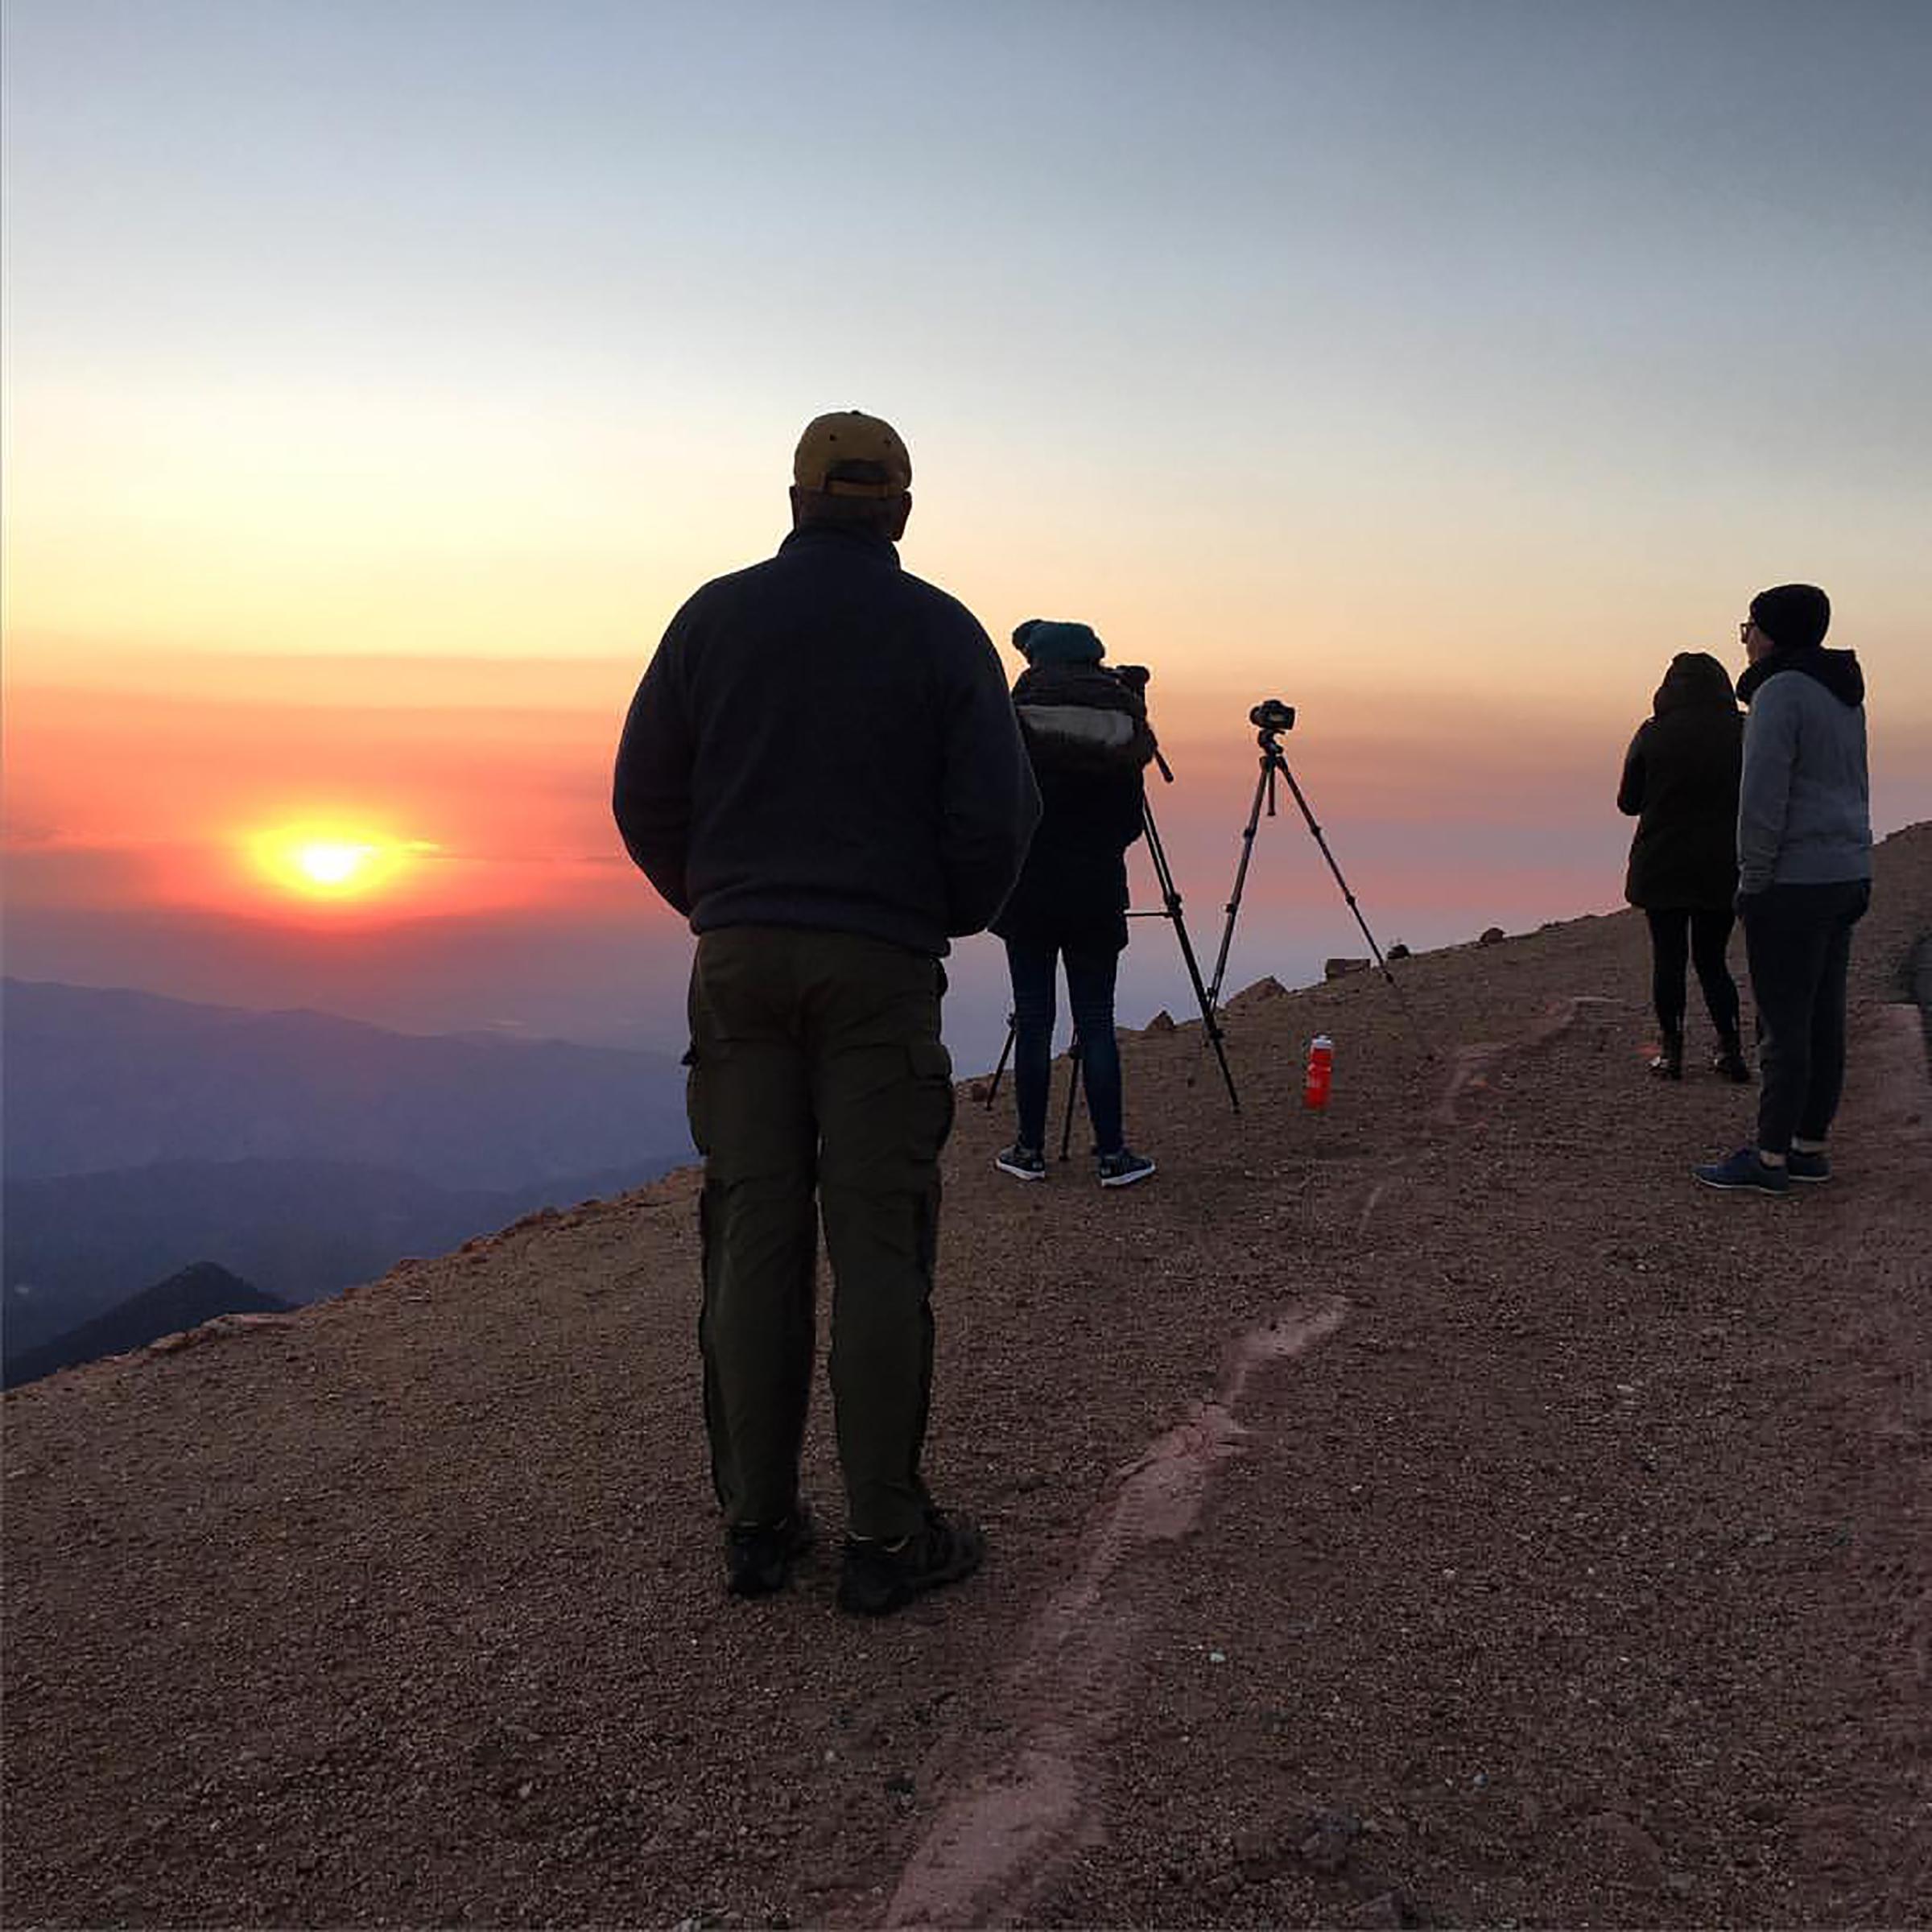 A sunrise from the summit of Pikes Peak.